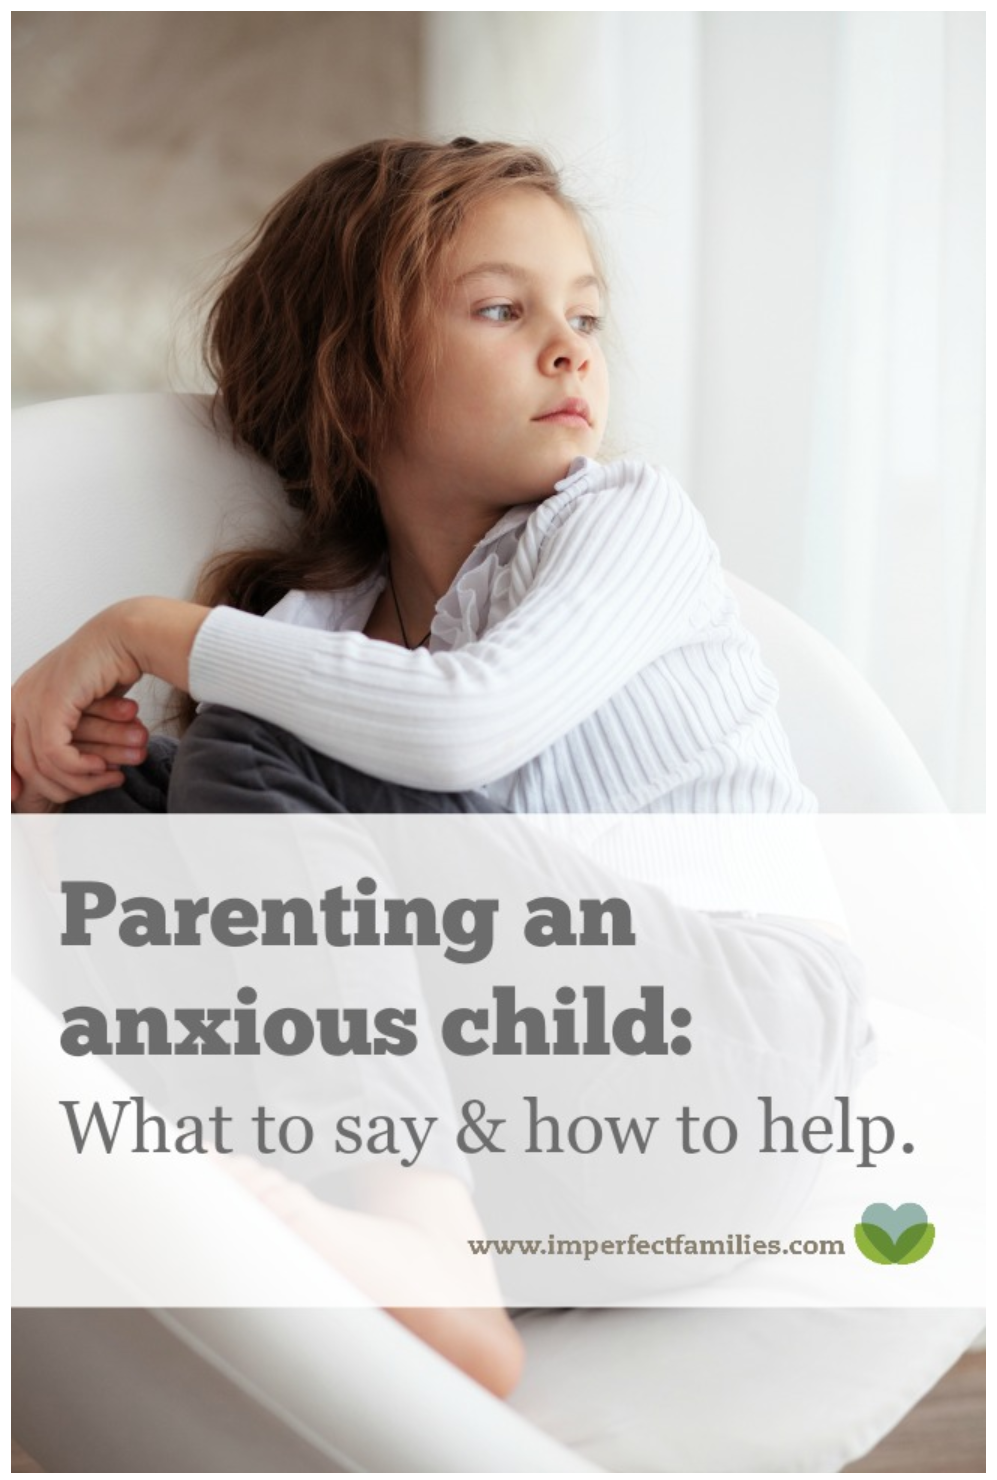 Parenting an anxious child